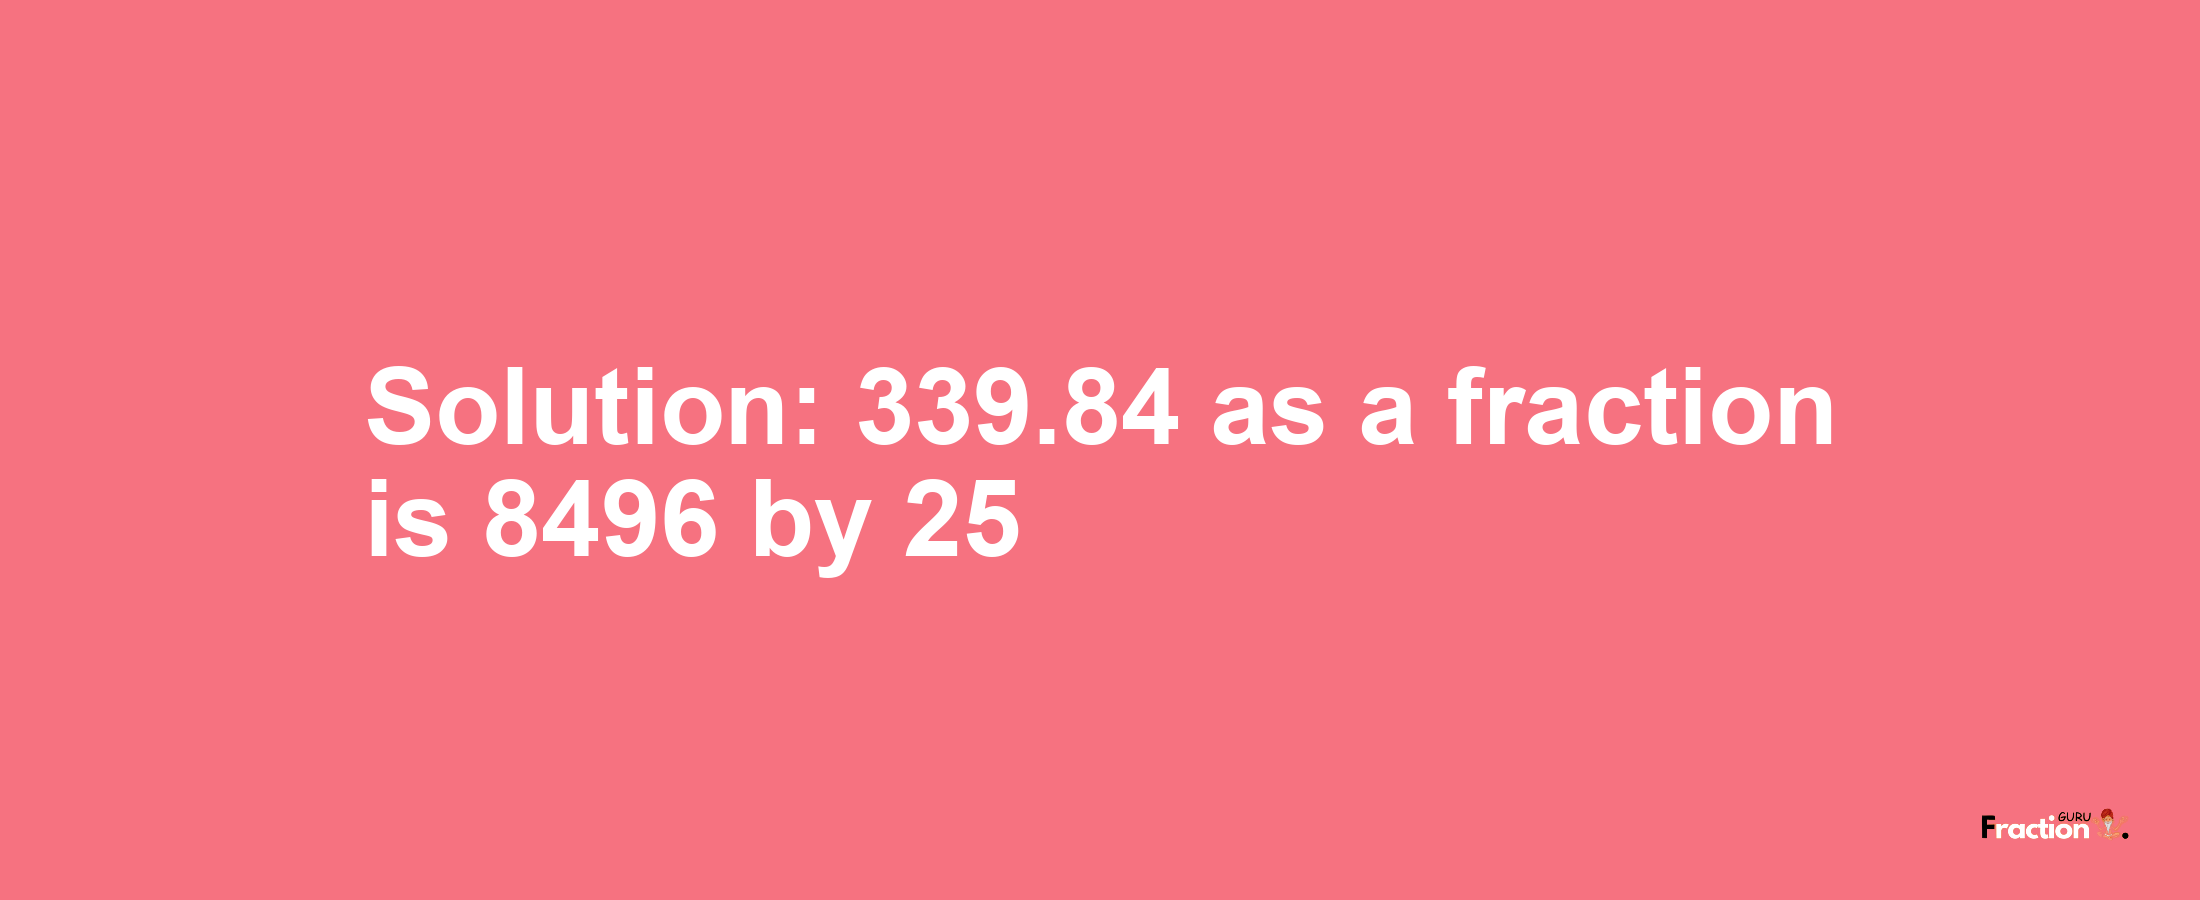 Solution:339.84 as a fraction is 8496/25